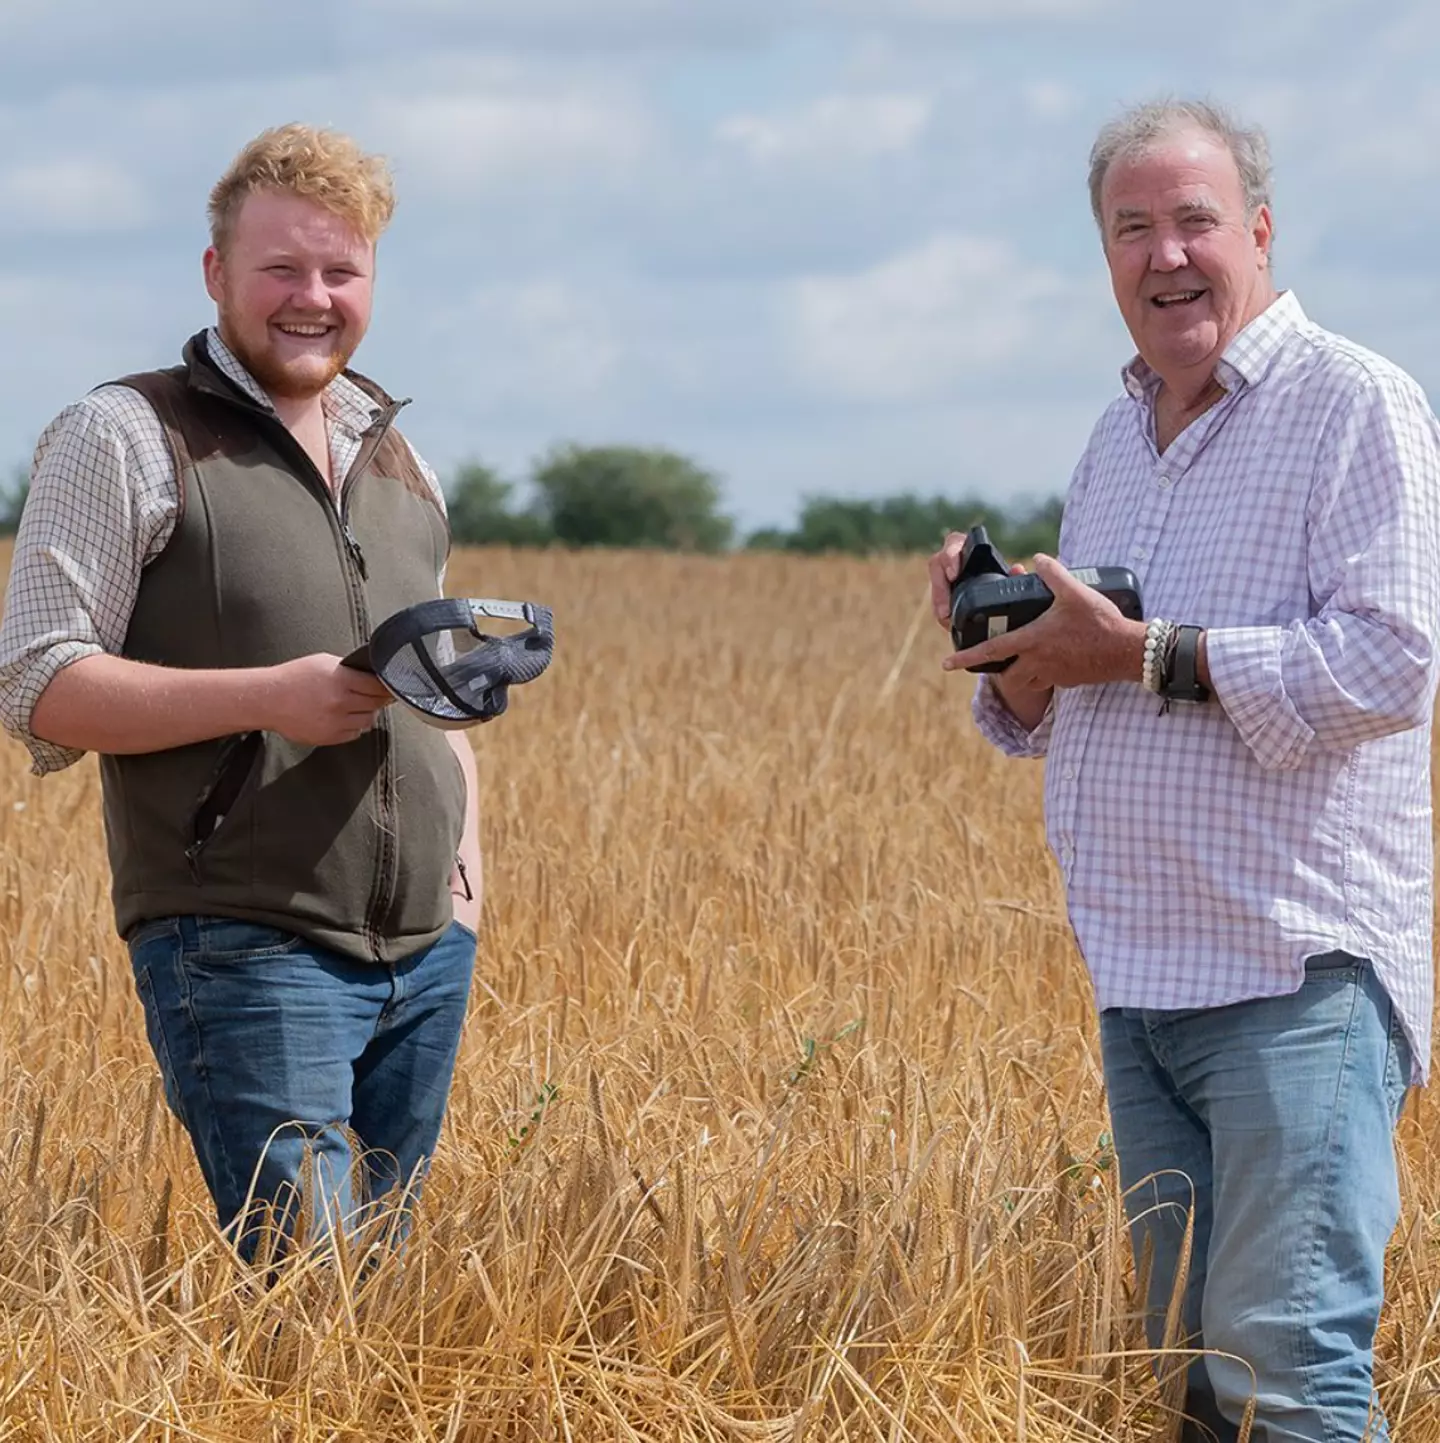 Jeremy Clarkson with fellow farmer and TV icon, Kaleb Cooper.